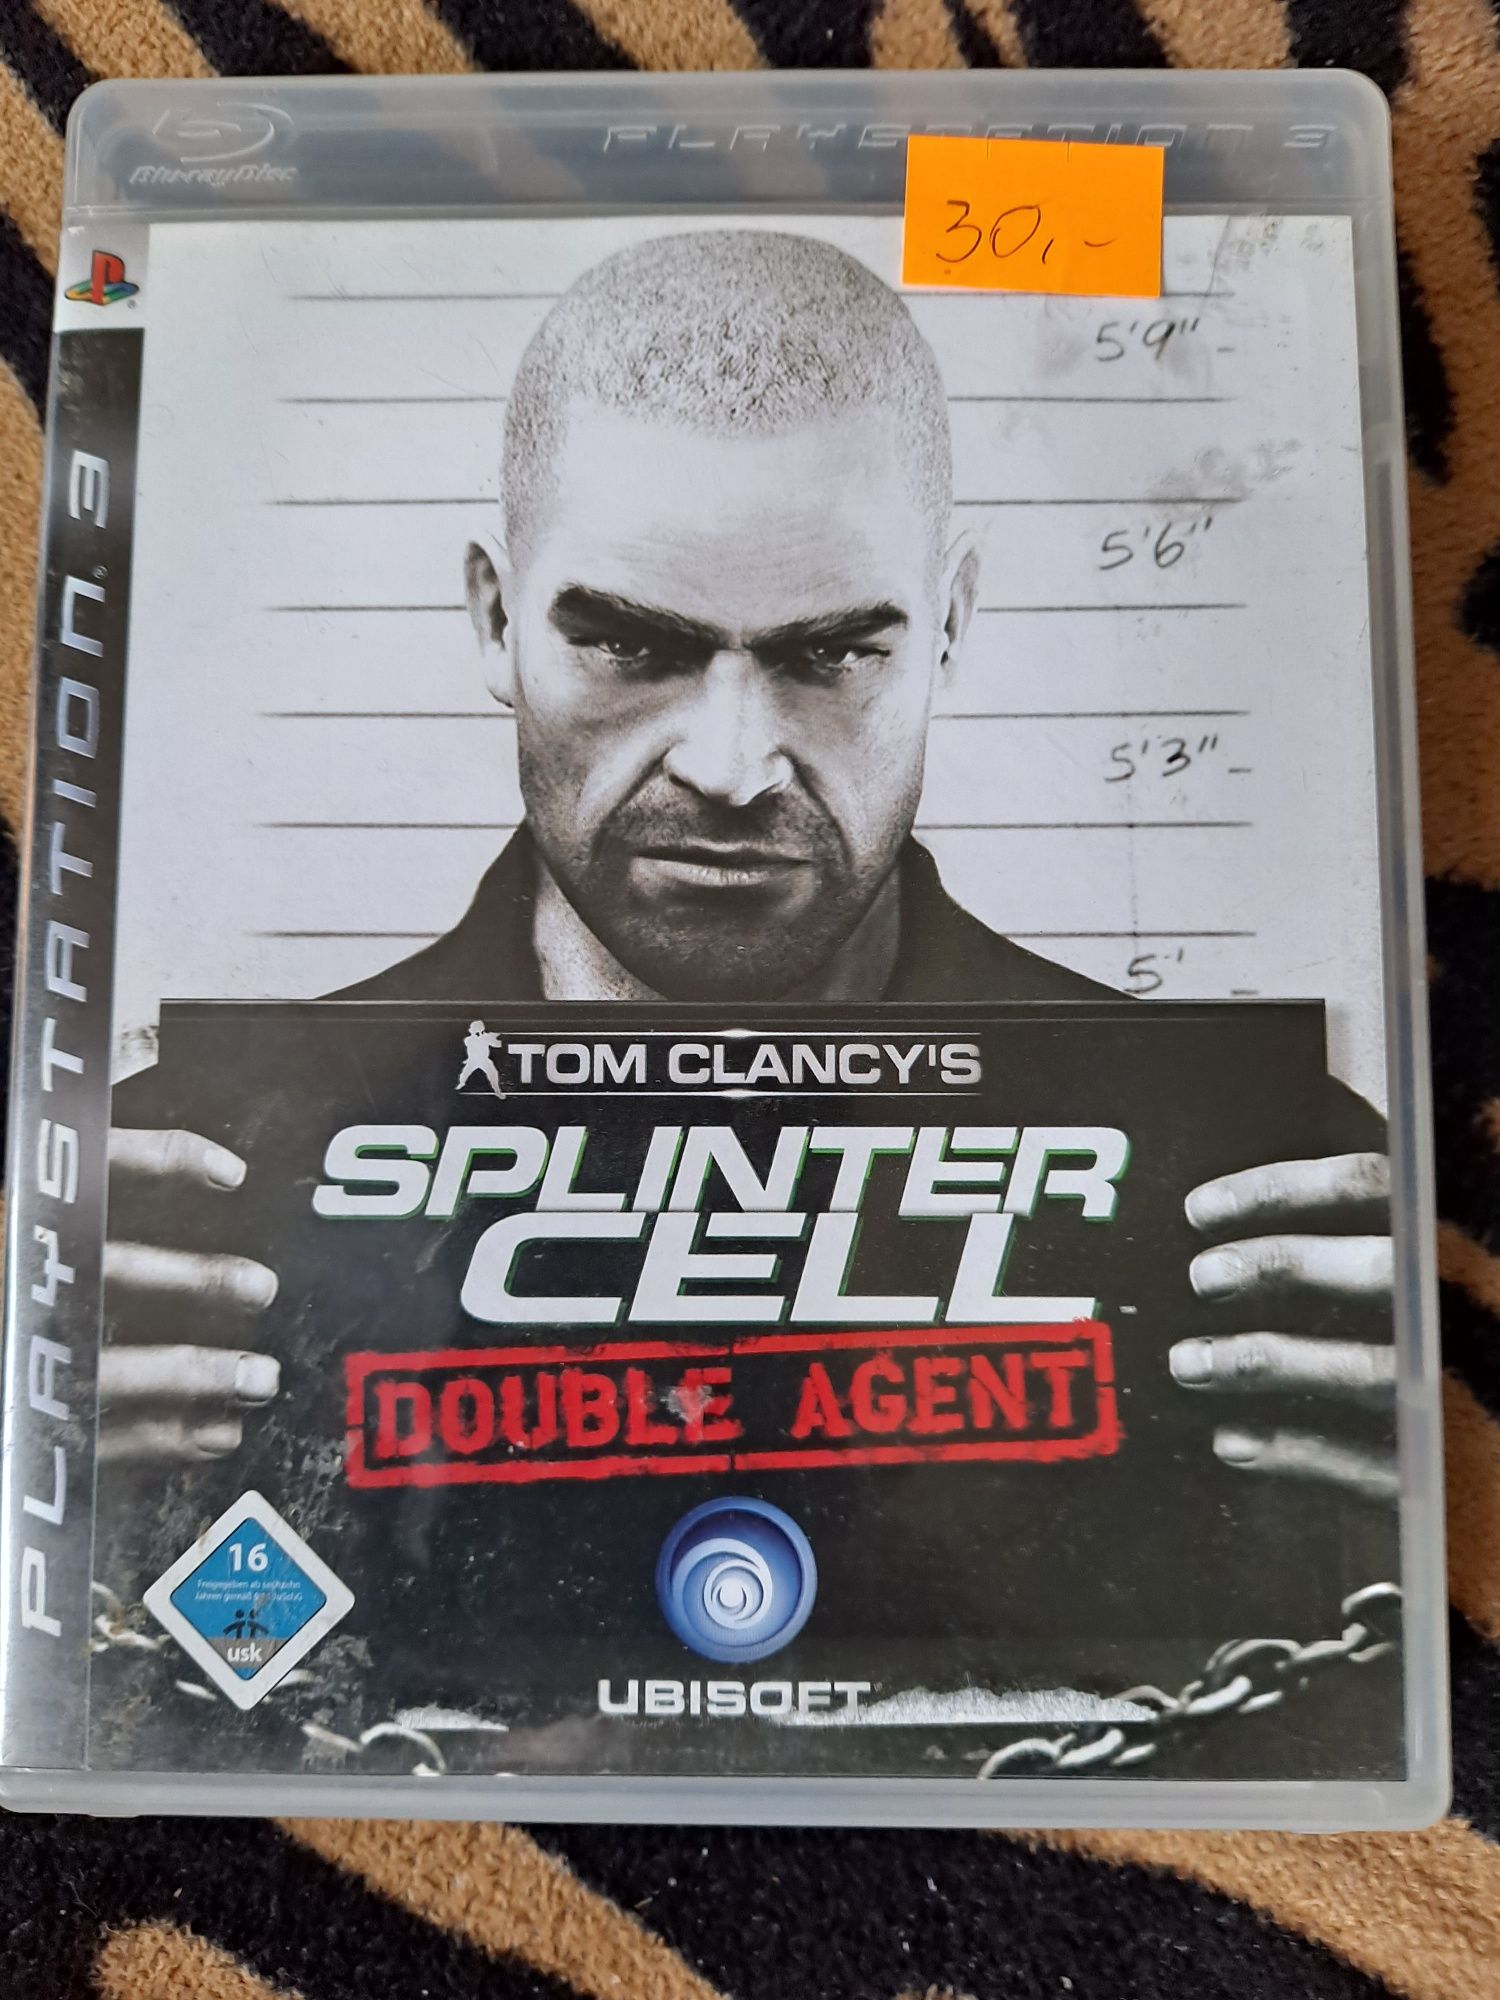 Splinter cell double agent ps3